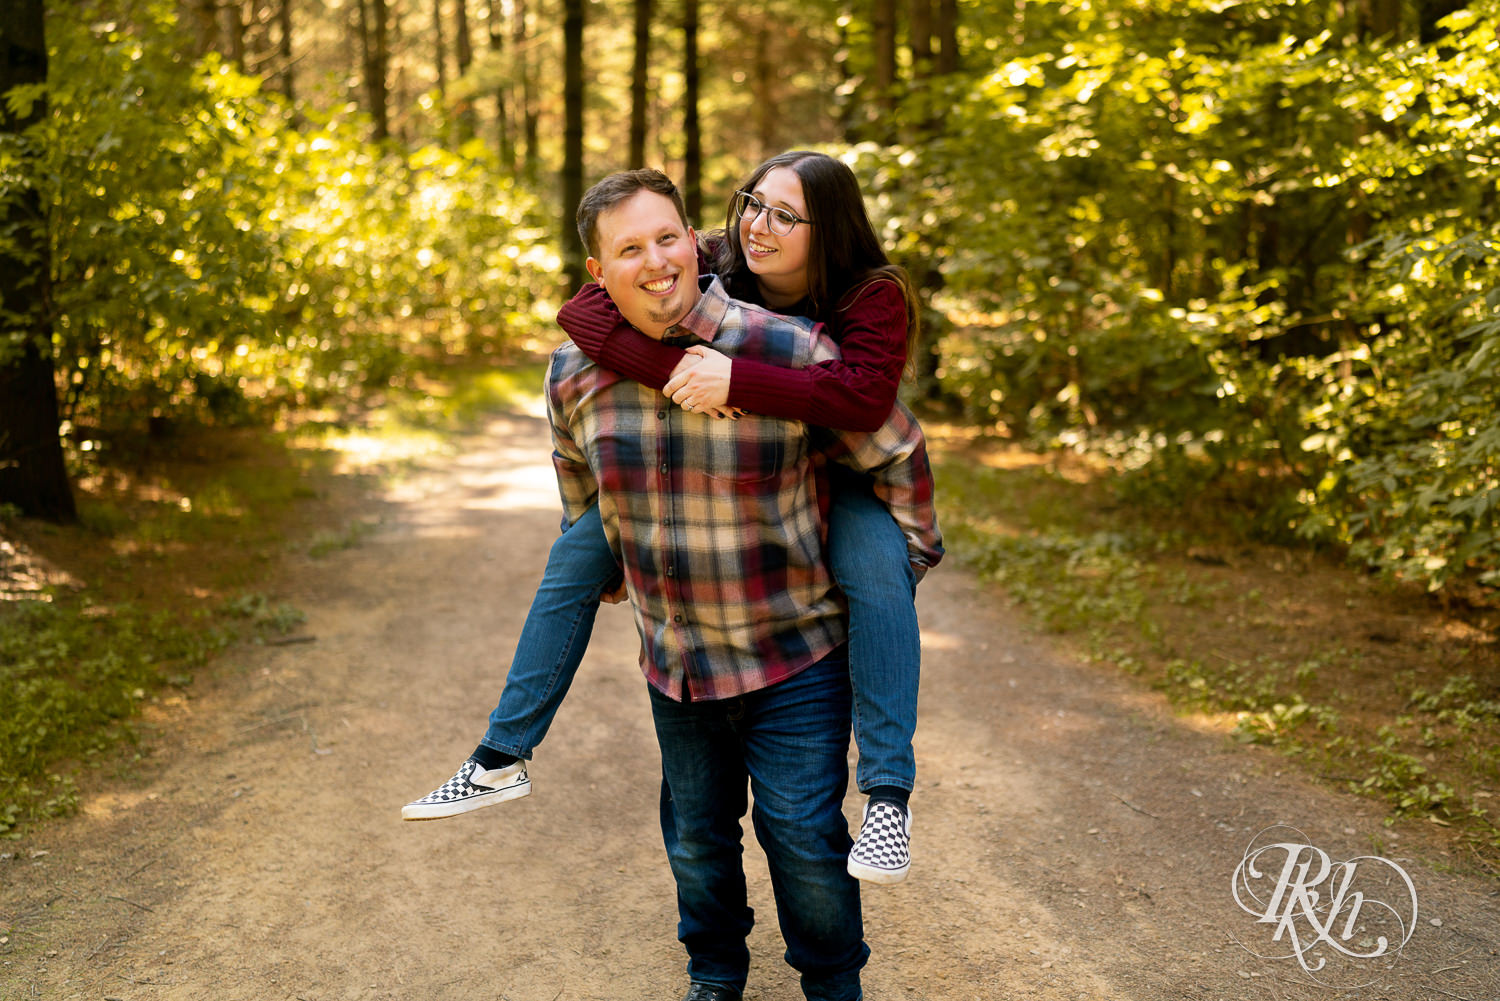 Man dressed in flannel and jeans carrying woman on his back in the woods.